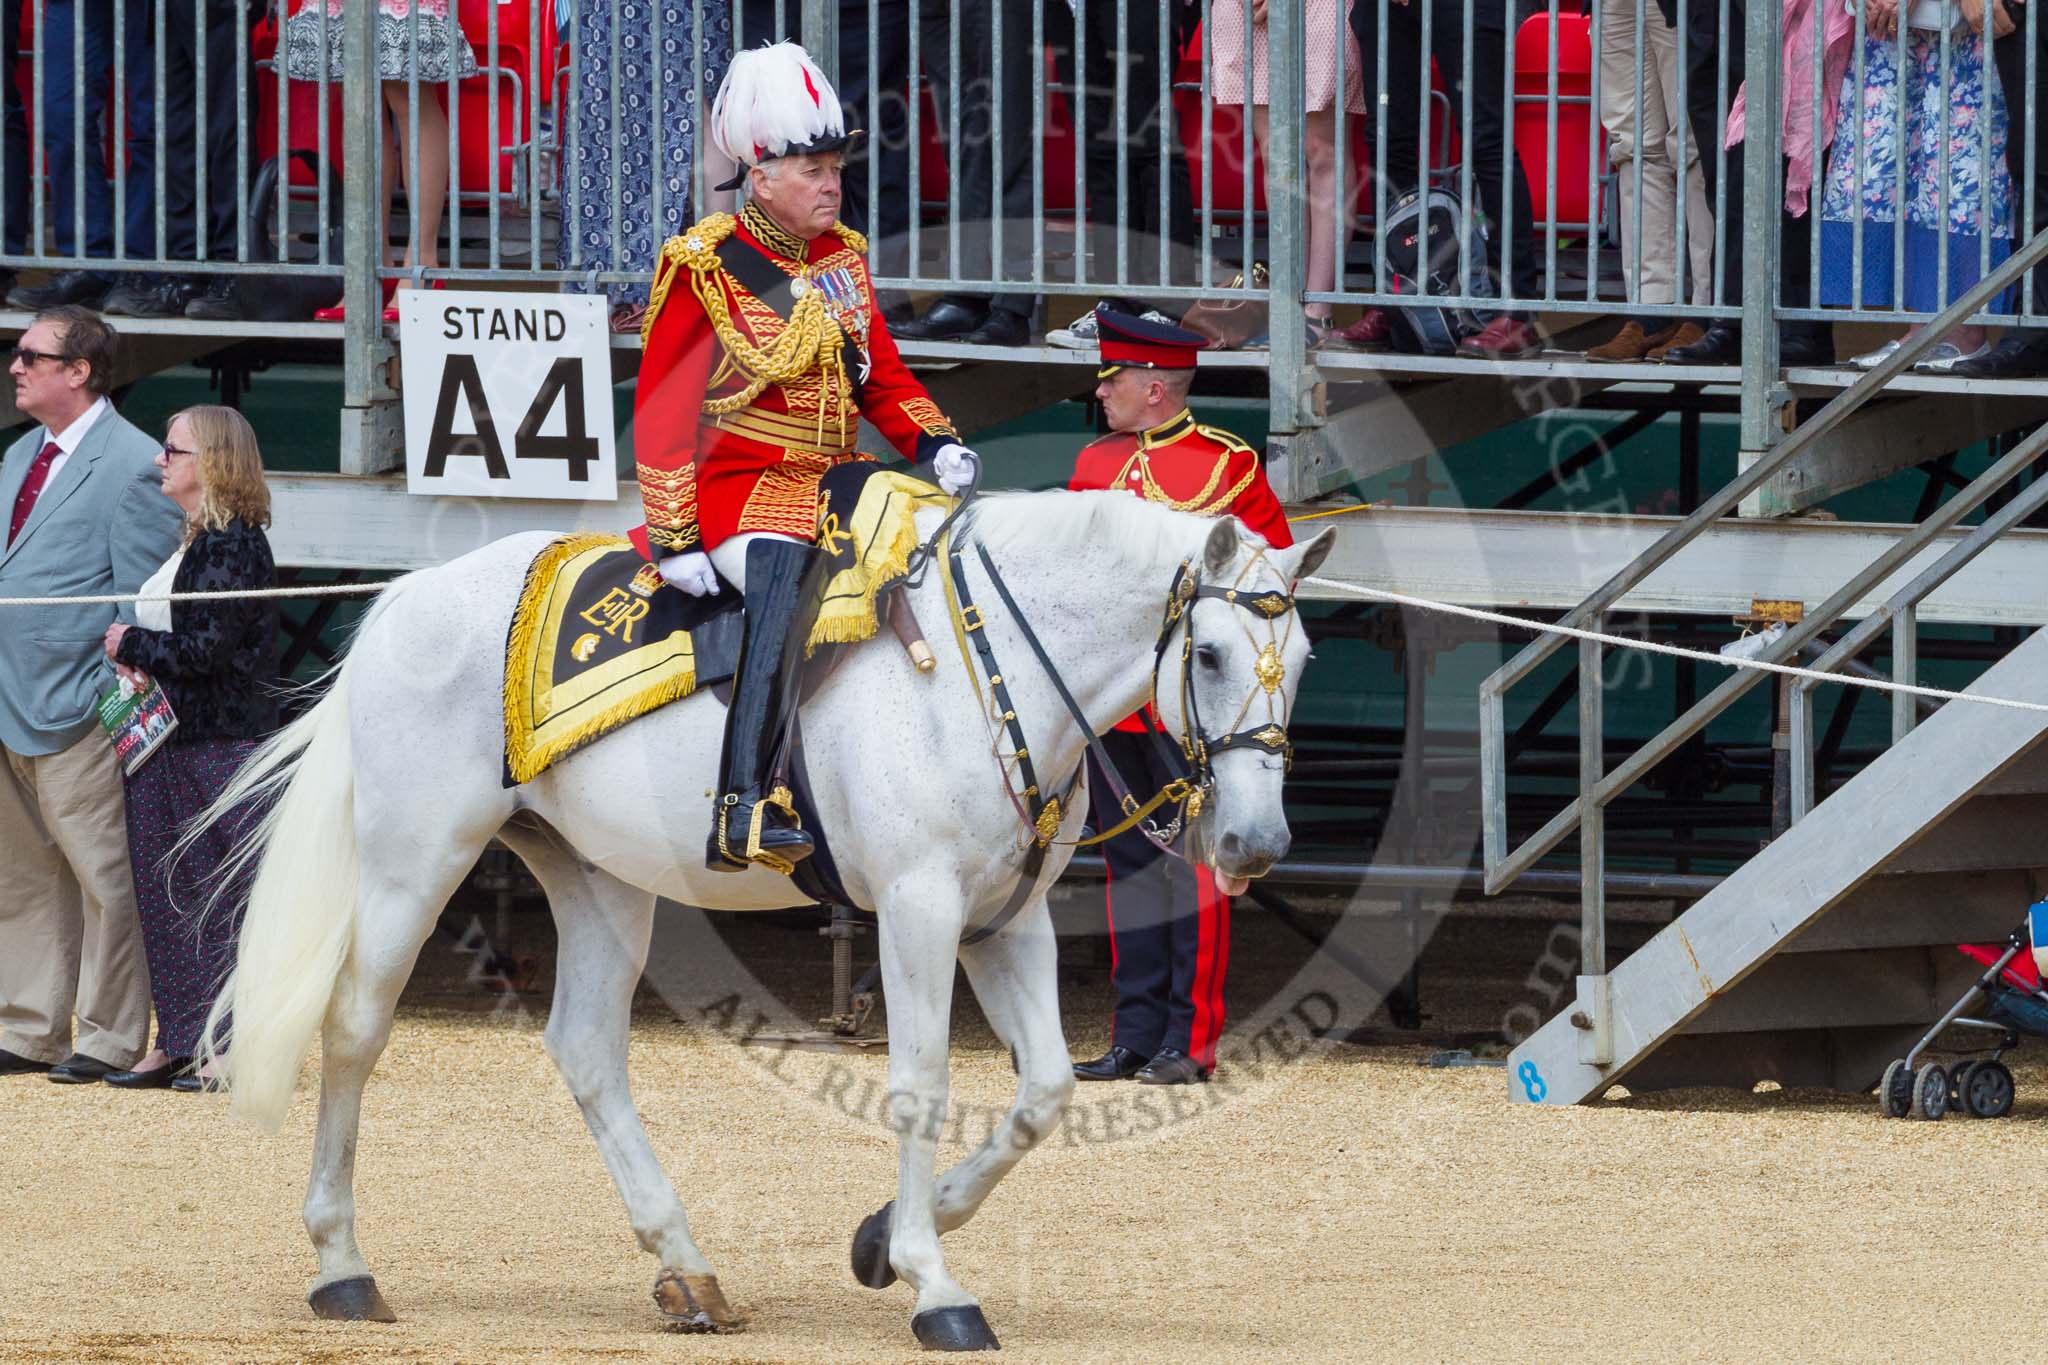 The Colonel's Review 2015.
Horse Guards Parade, Westminster,
London,

United Kingdom,
on 06 June 2015 at 10:59, image #182